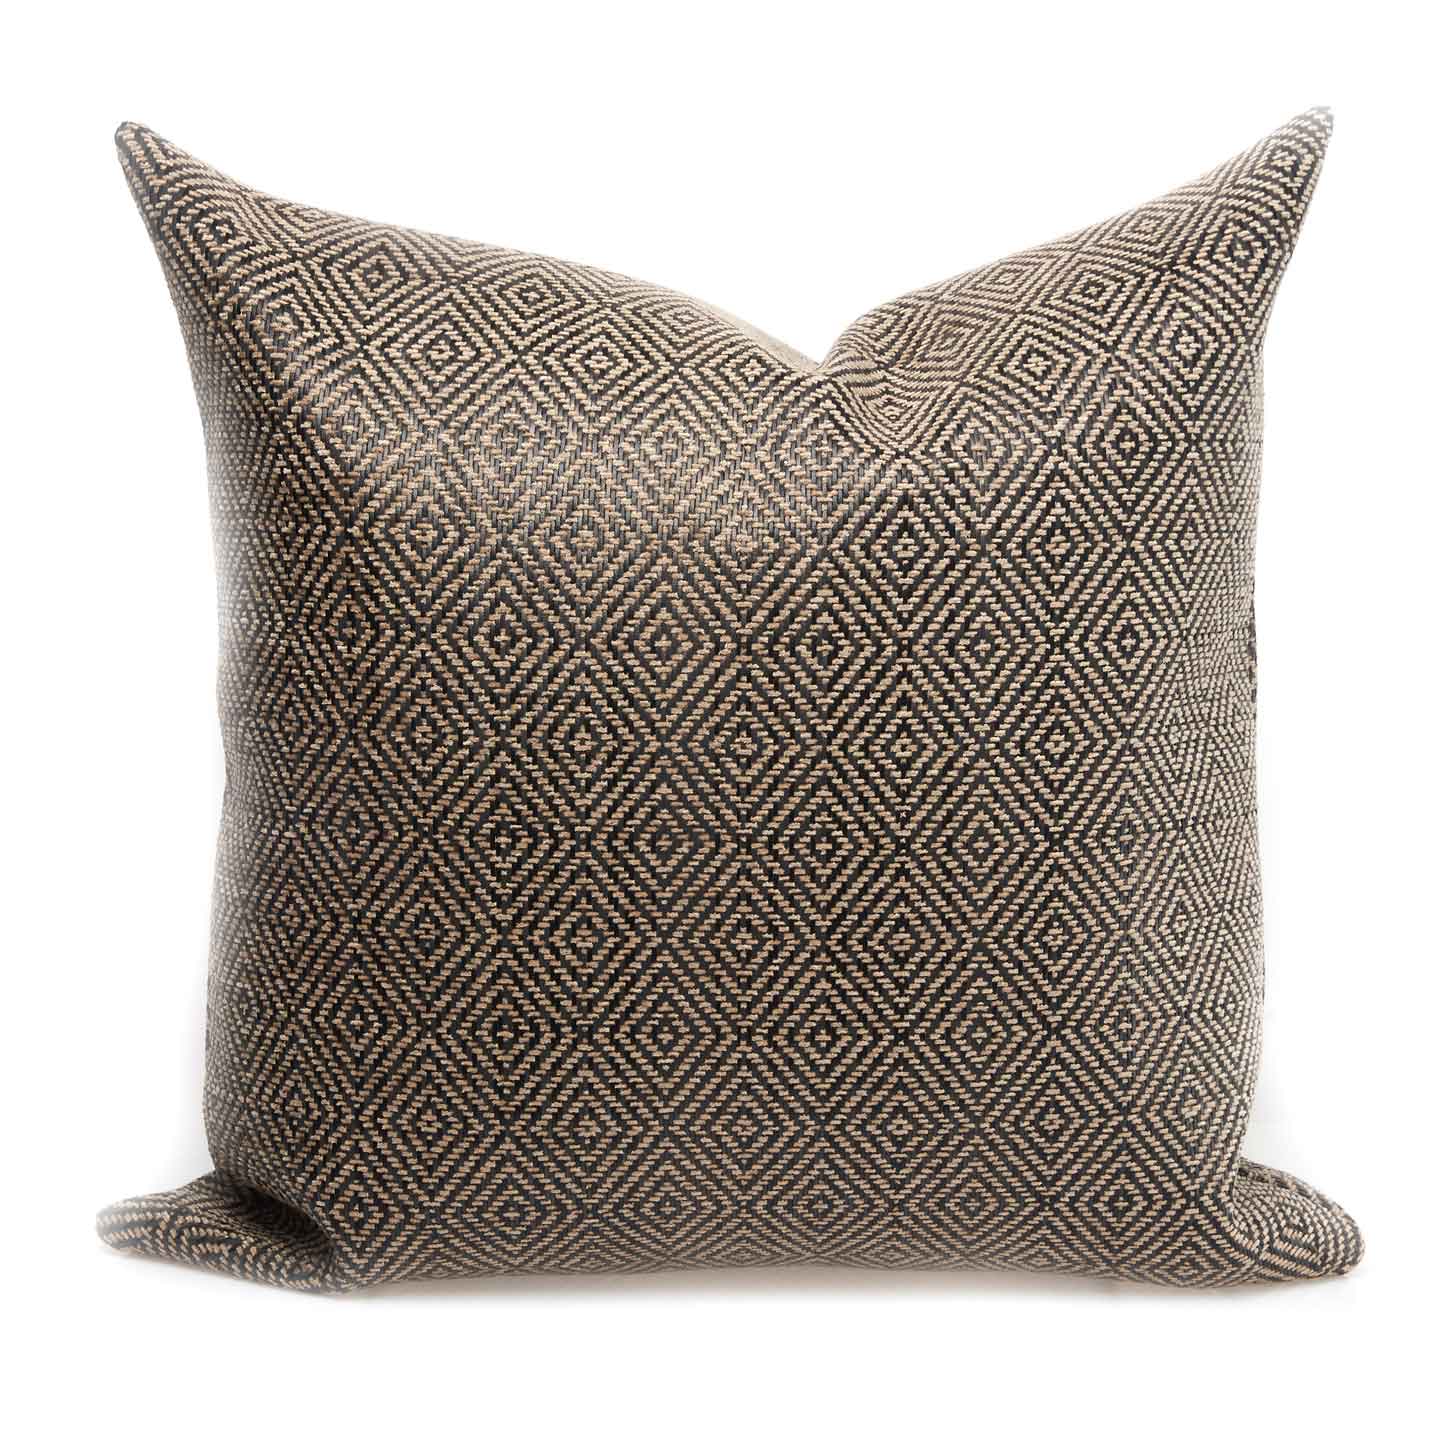 The Betsy pillow by Beau Home